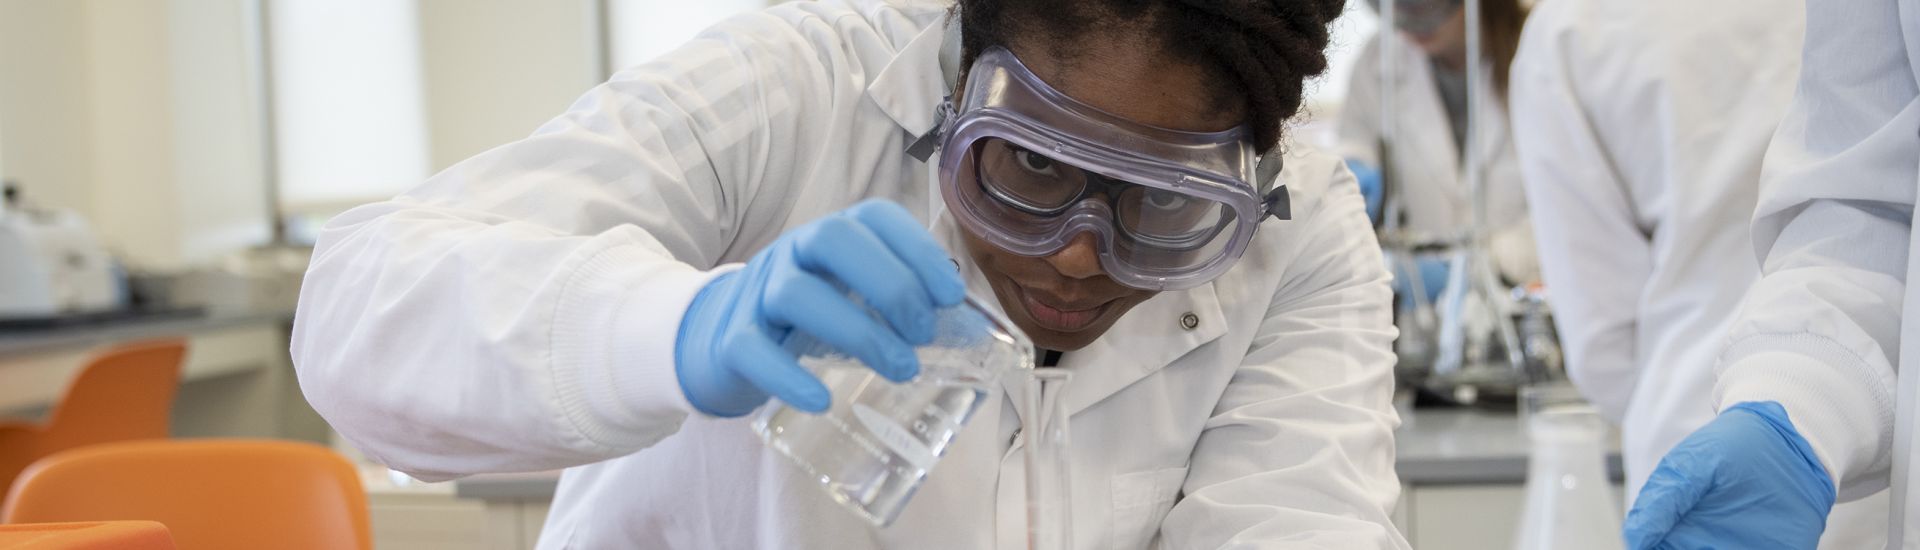 Post Bacc Student in lab gear pouring liquid into a beaker